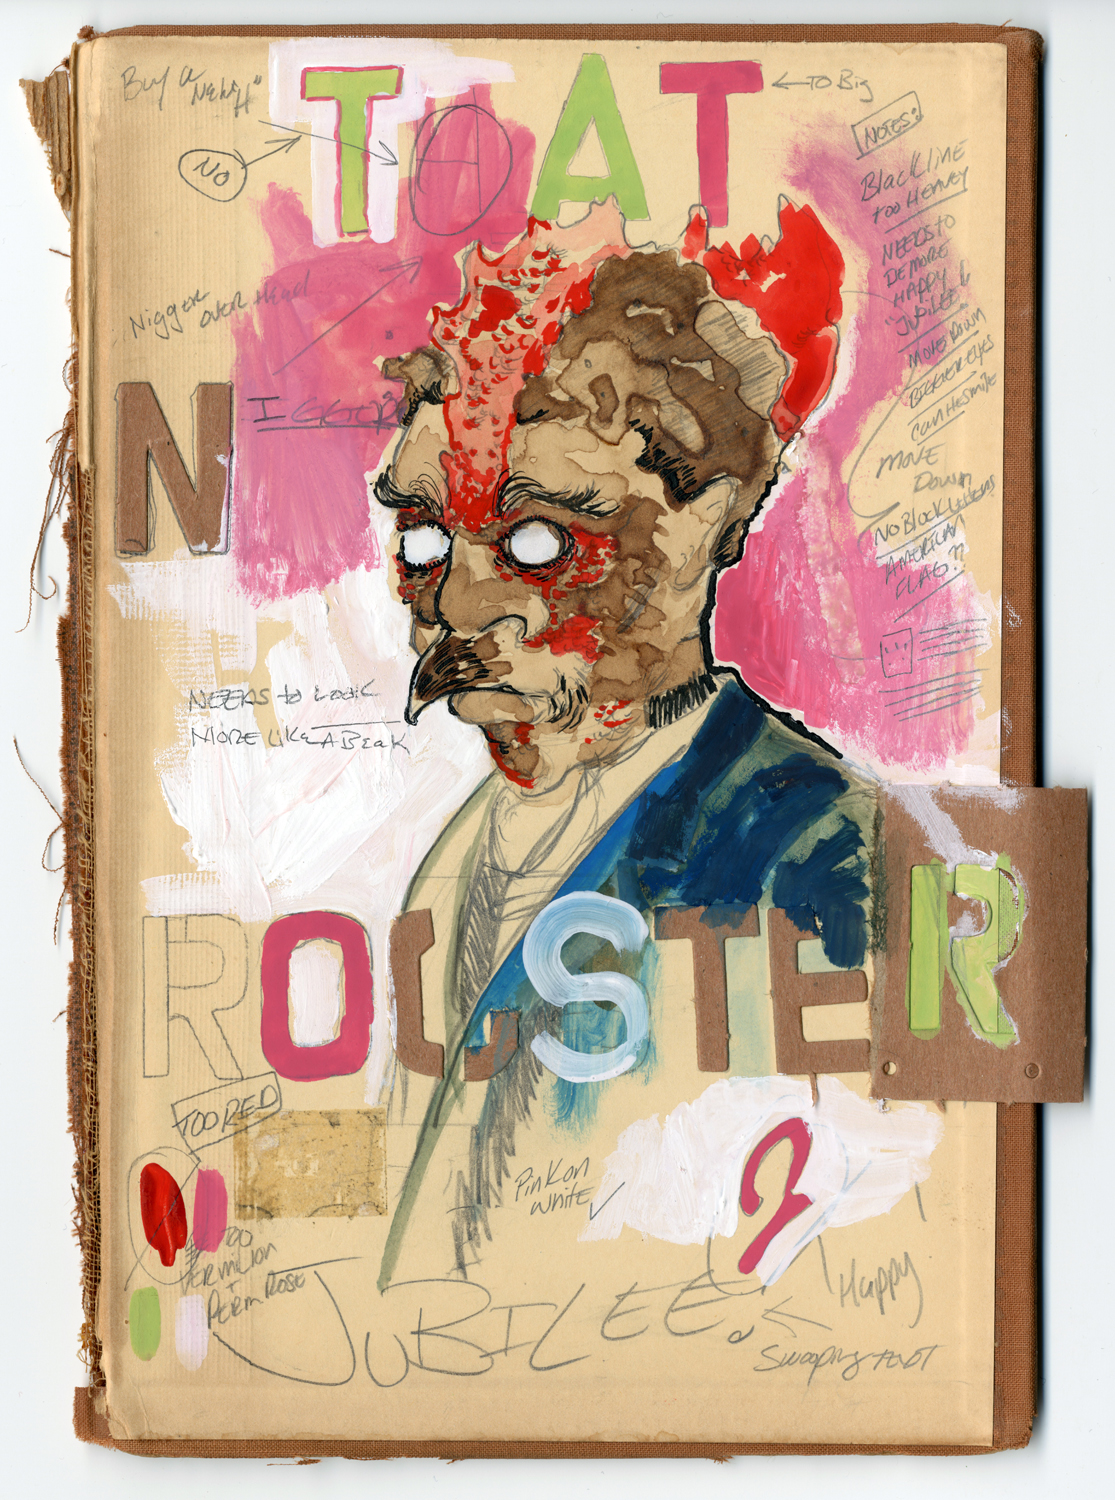    That Nigger Rooster Jubilee!   2013 Mixed media collage, gouache, ink, graphite on book cover 6 x 8.5 